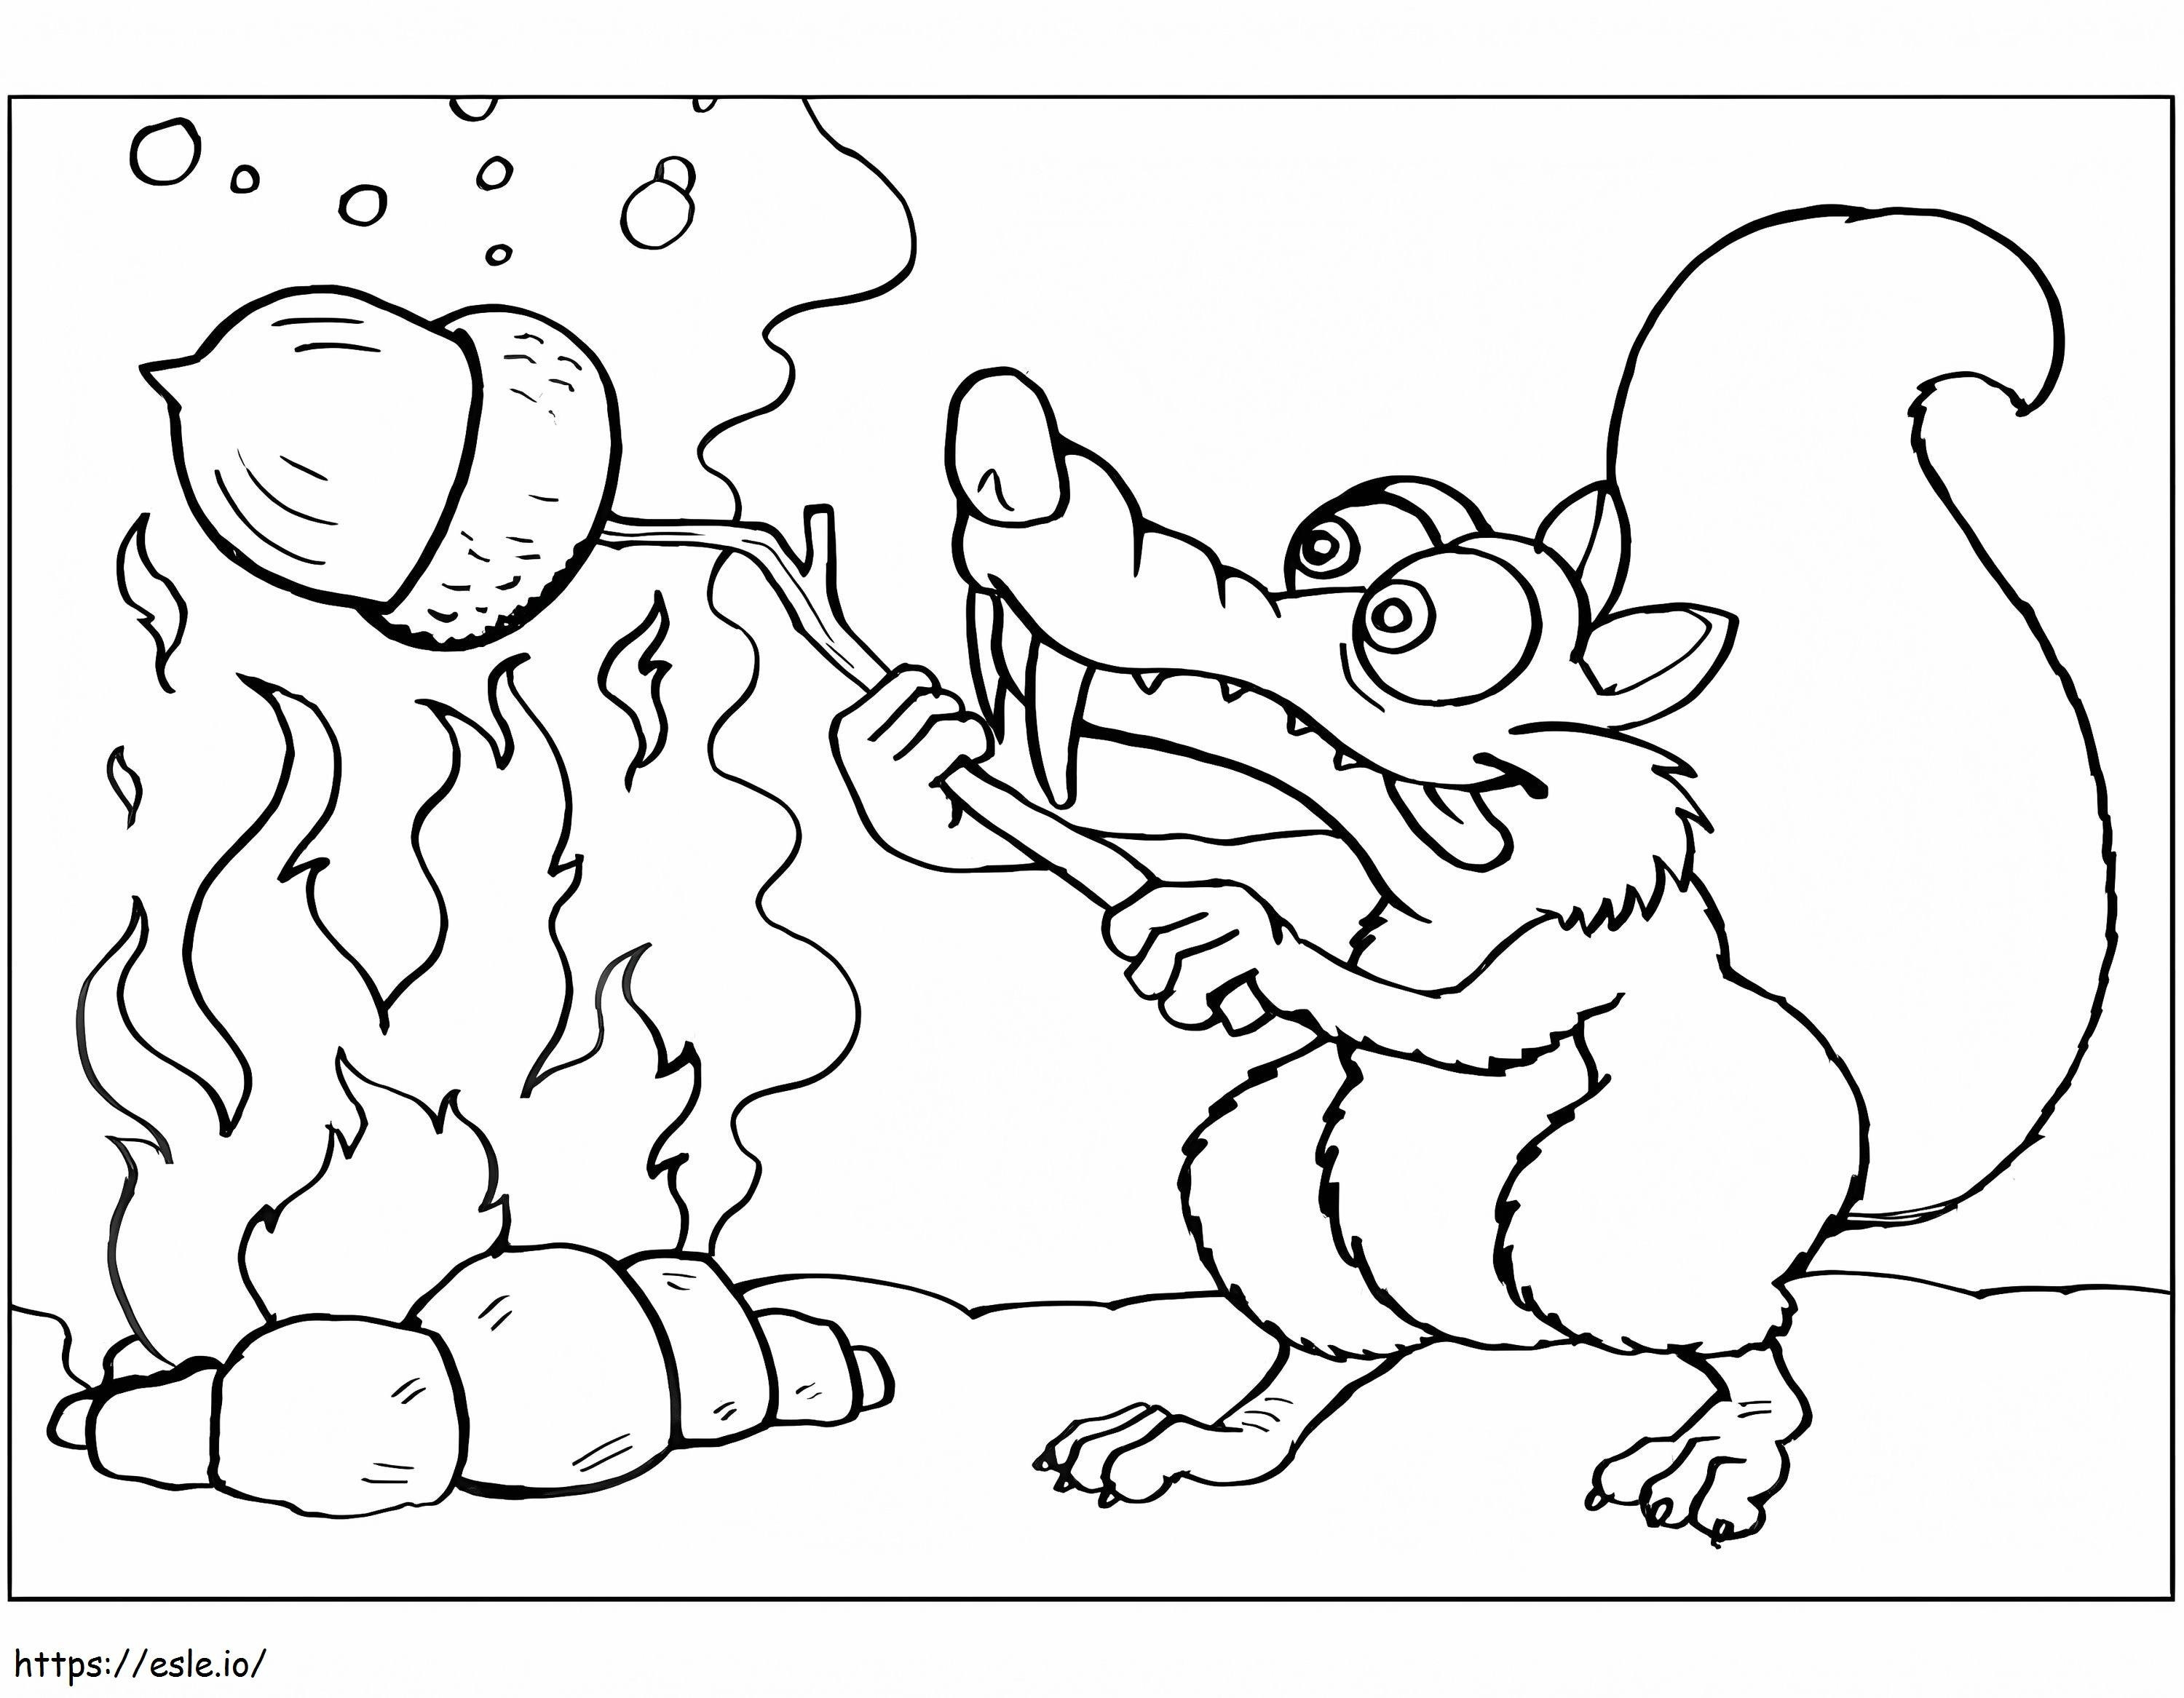 Scrat Is Hungry coloring page